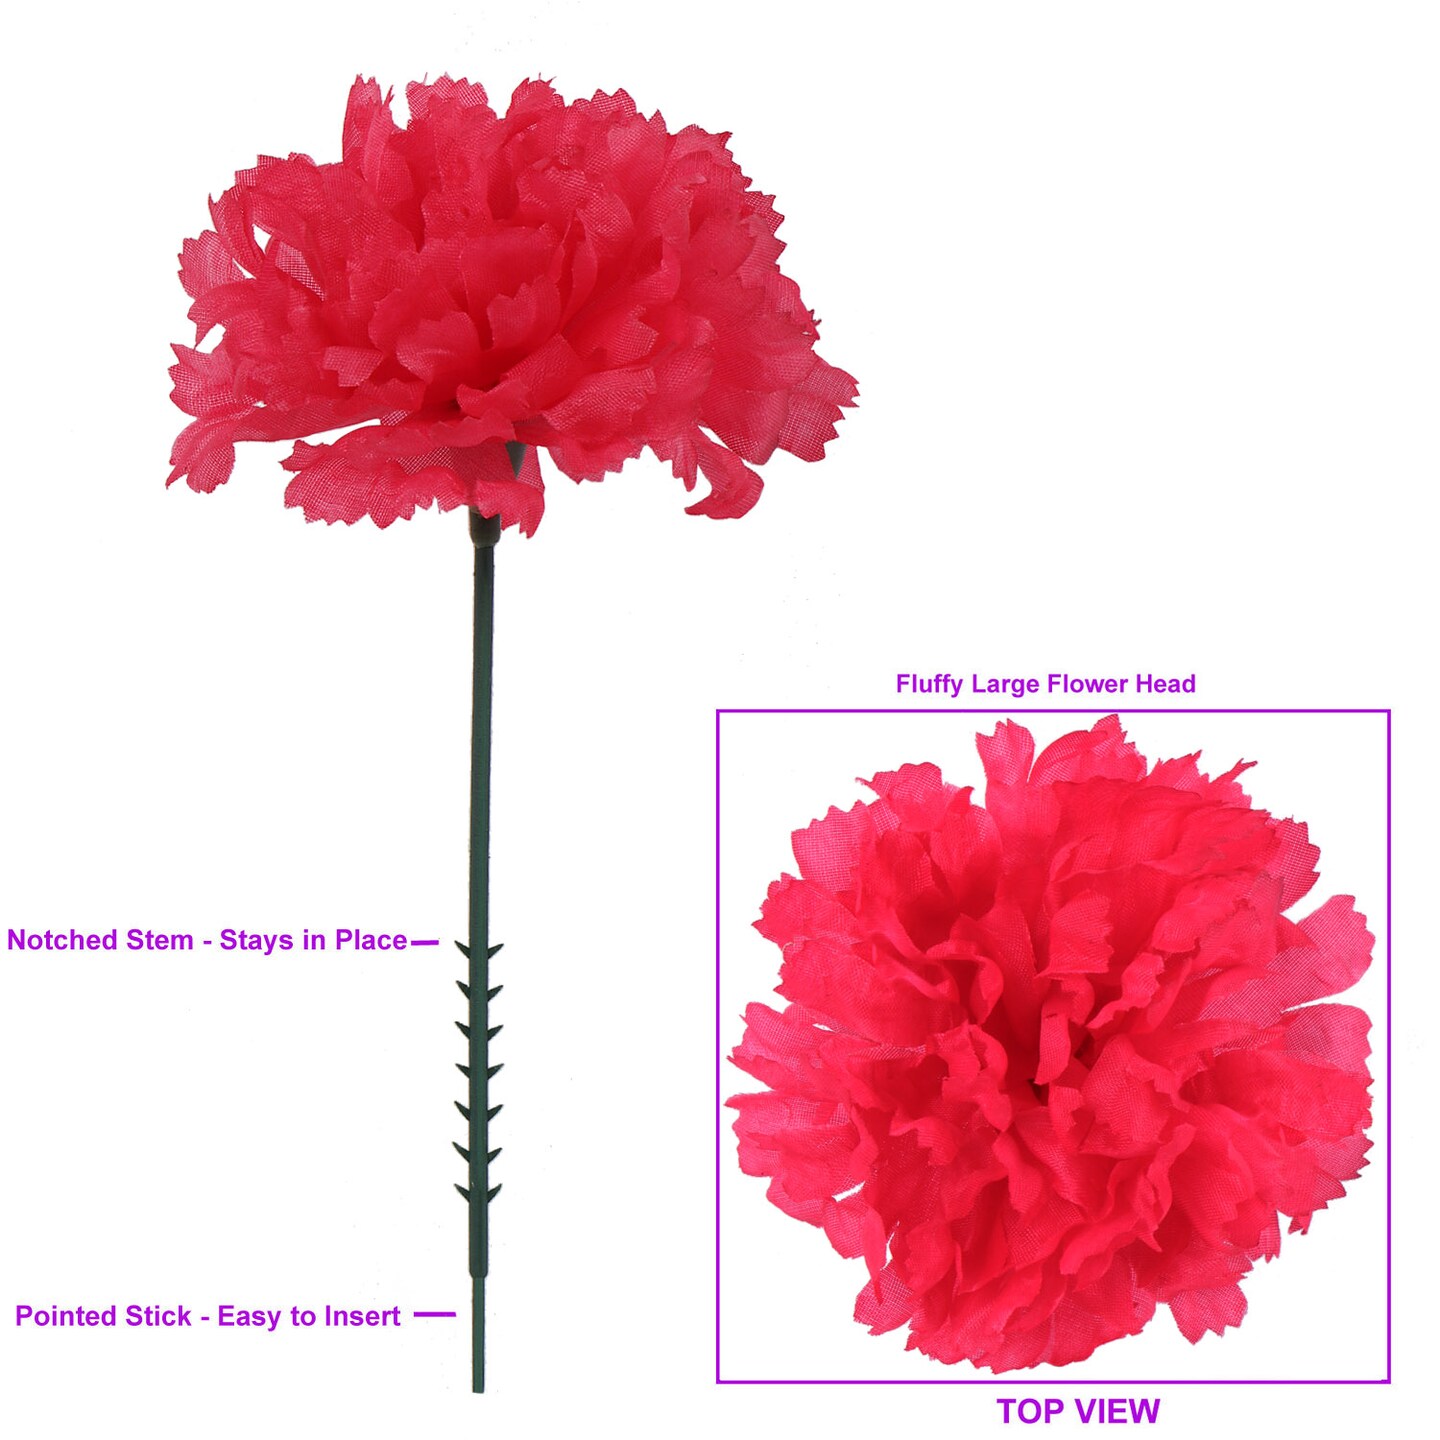 Set of 100: Red Carnation Flower Picks, 5 Long, 3.5 Wide, Floral Picks, Crafting Supplies, Parties & Events, Home & Office Decor